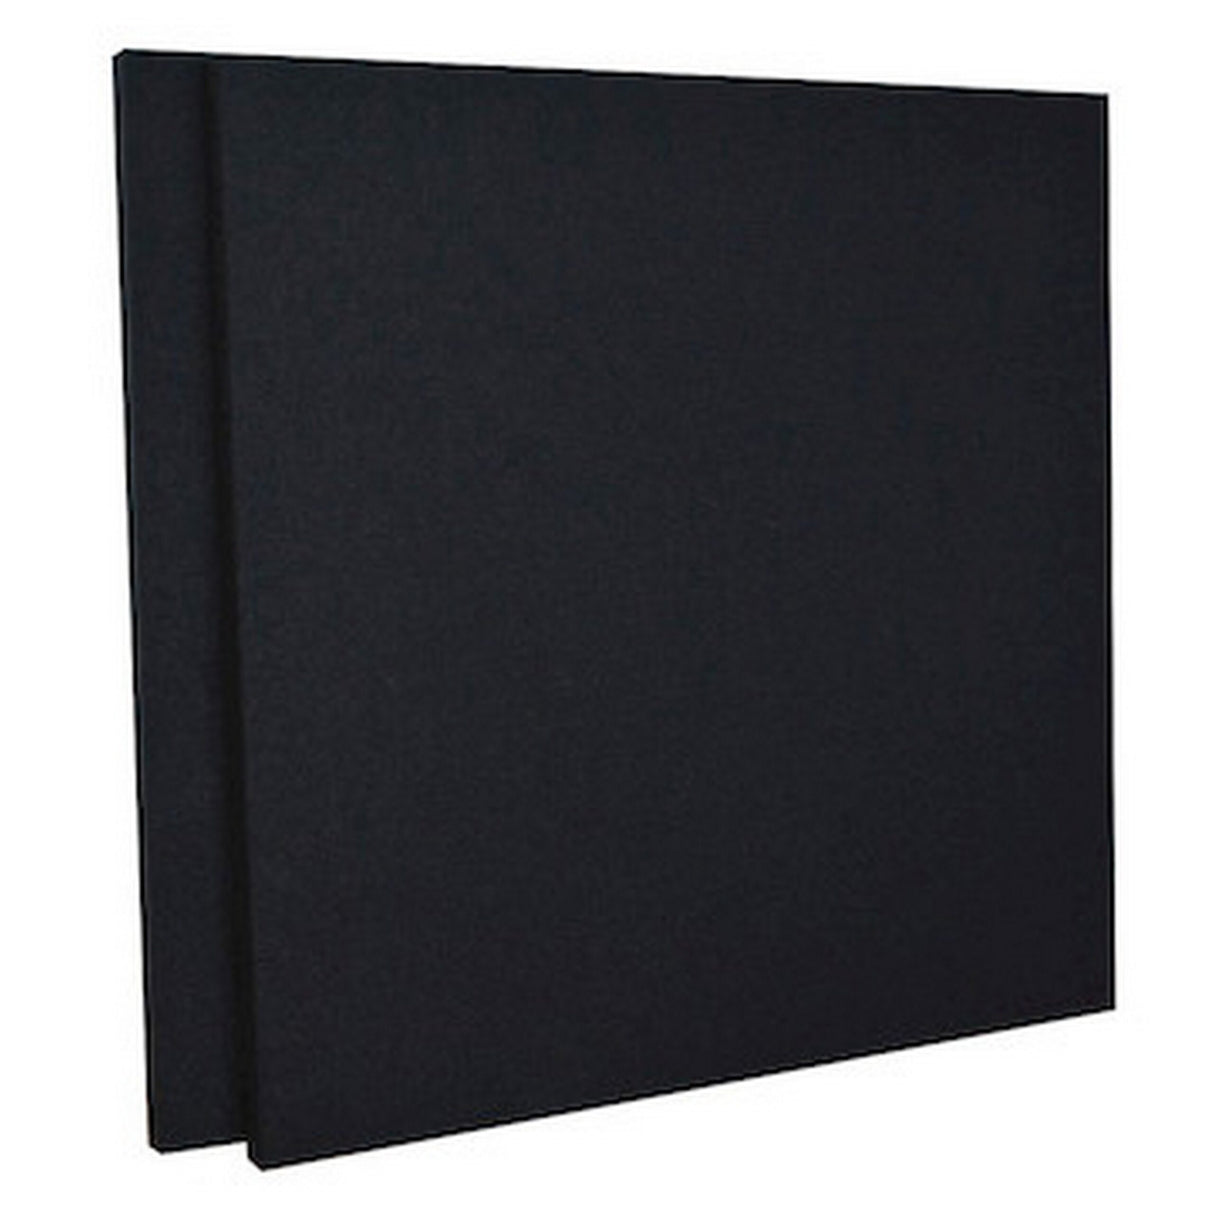 GeerFab ProZorber 2424 24 x 24 Inch By 1 Inch Panels, Pair, Black